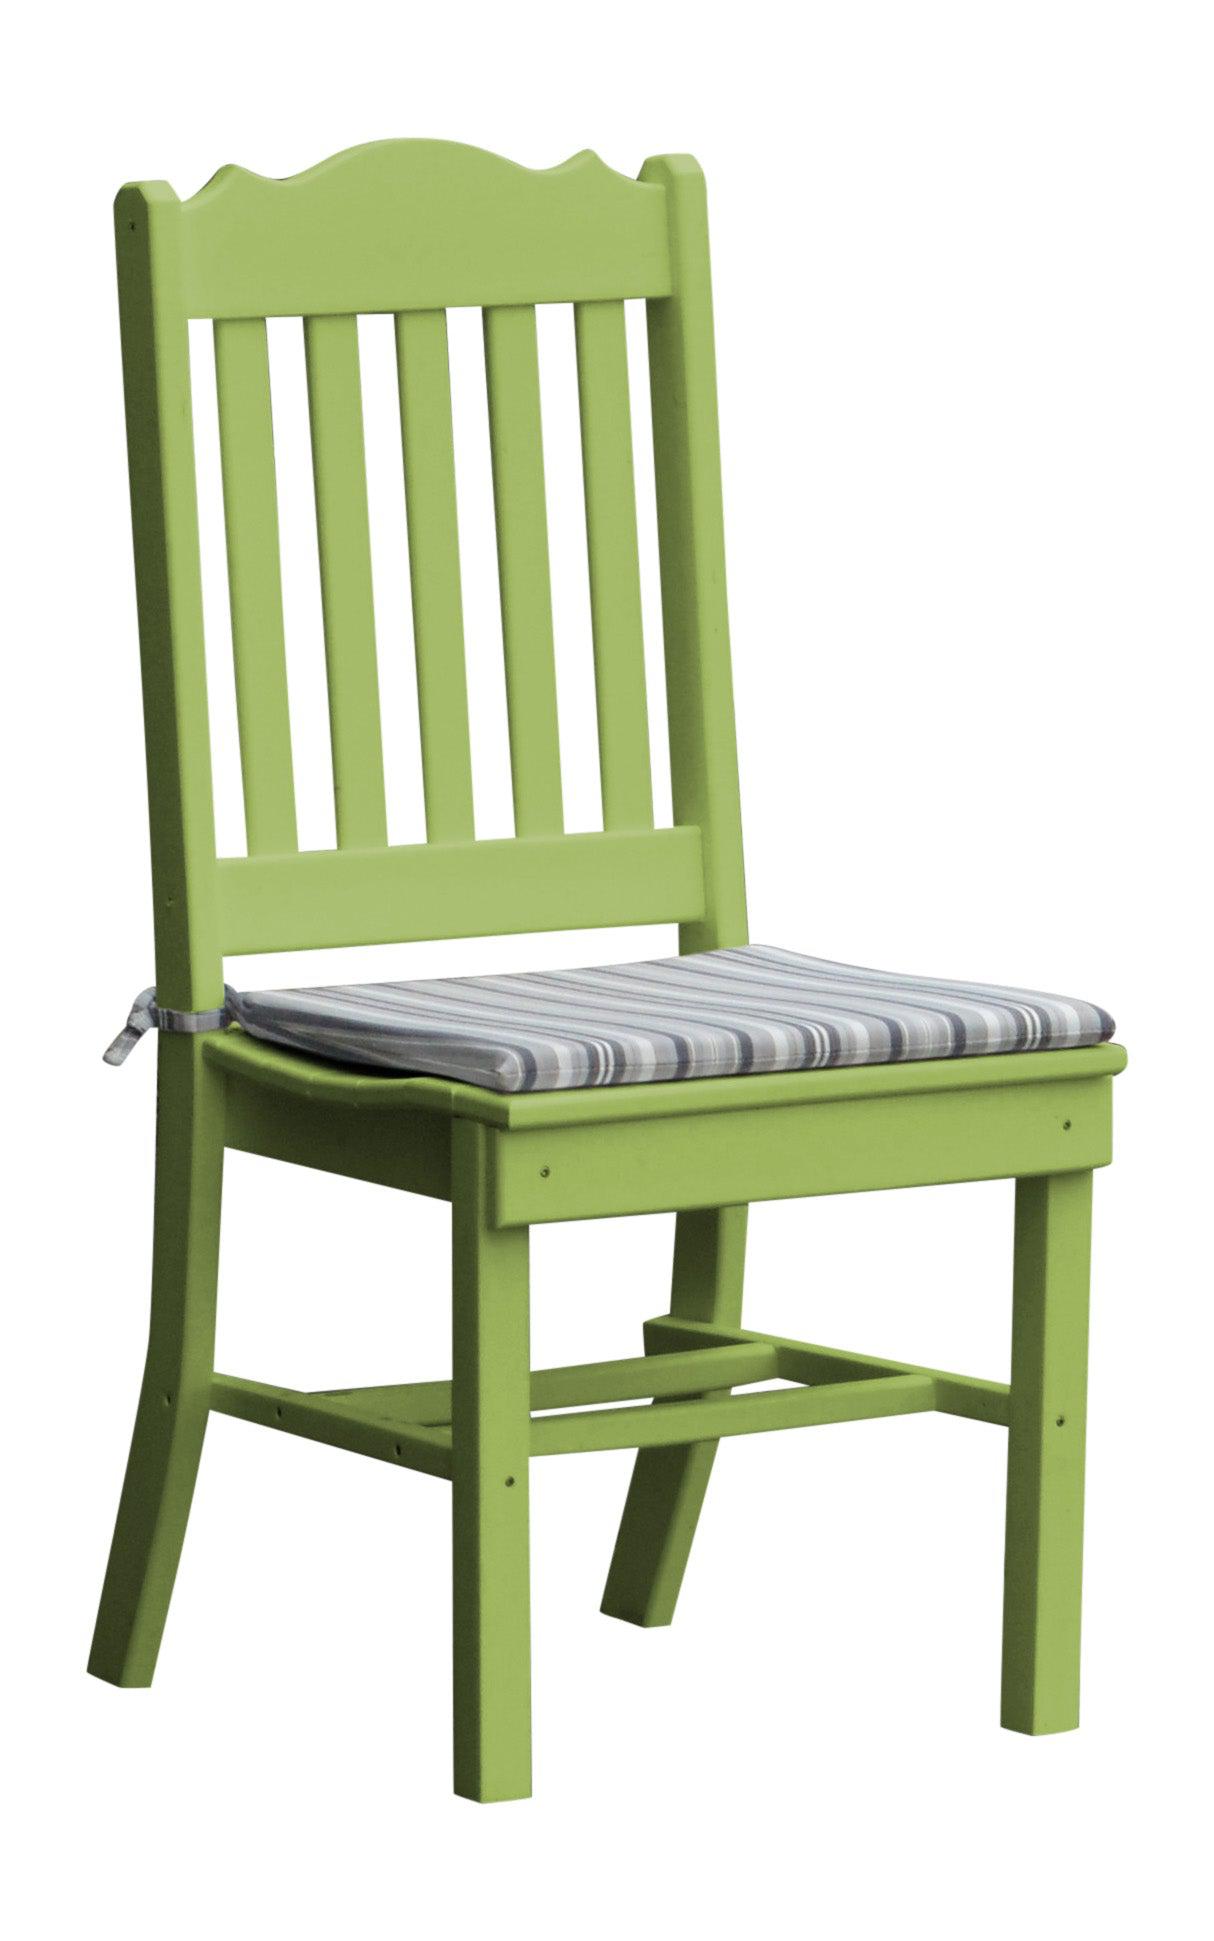 A&L Furniture Company Recycled Plastic Royal Dining Chair A&L Furniture Company Recycled Plastic Royal Dining Chair  - Tropical Lime